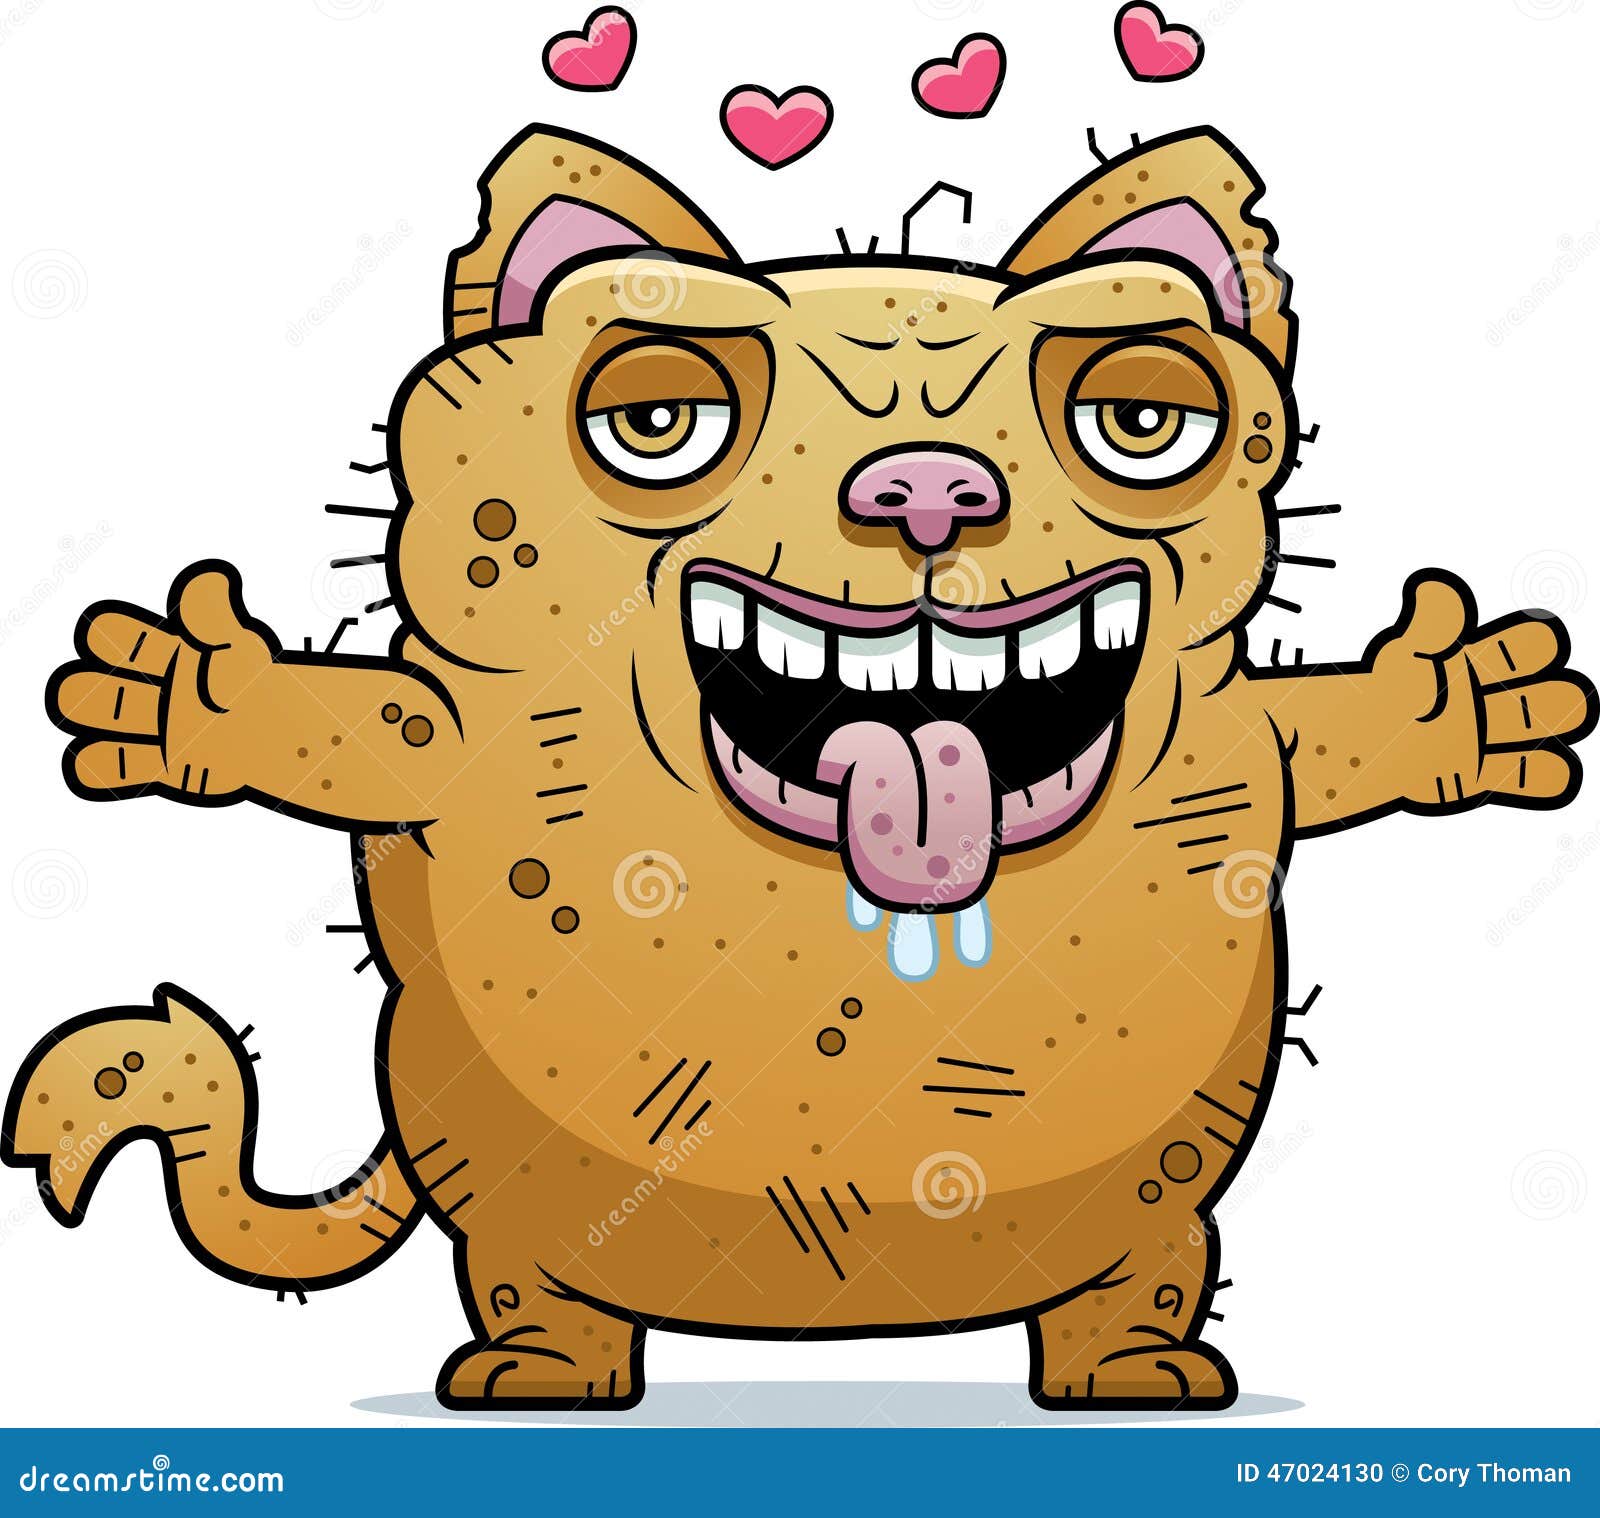 ugly clipart images - photo #38